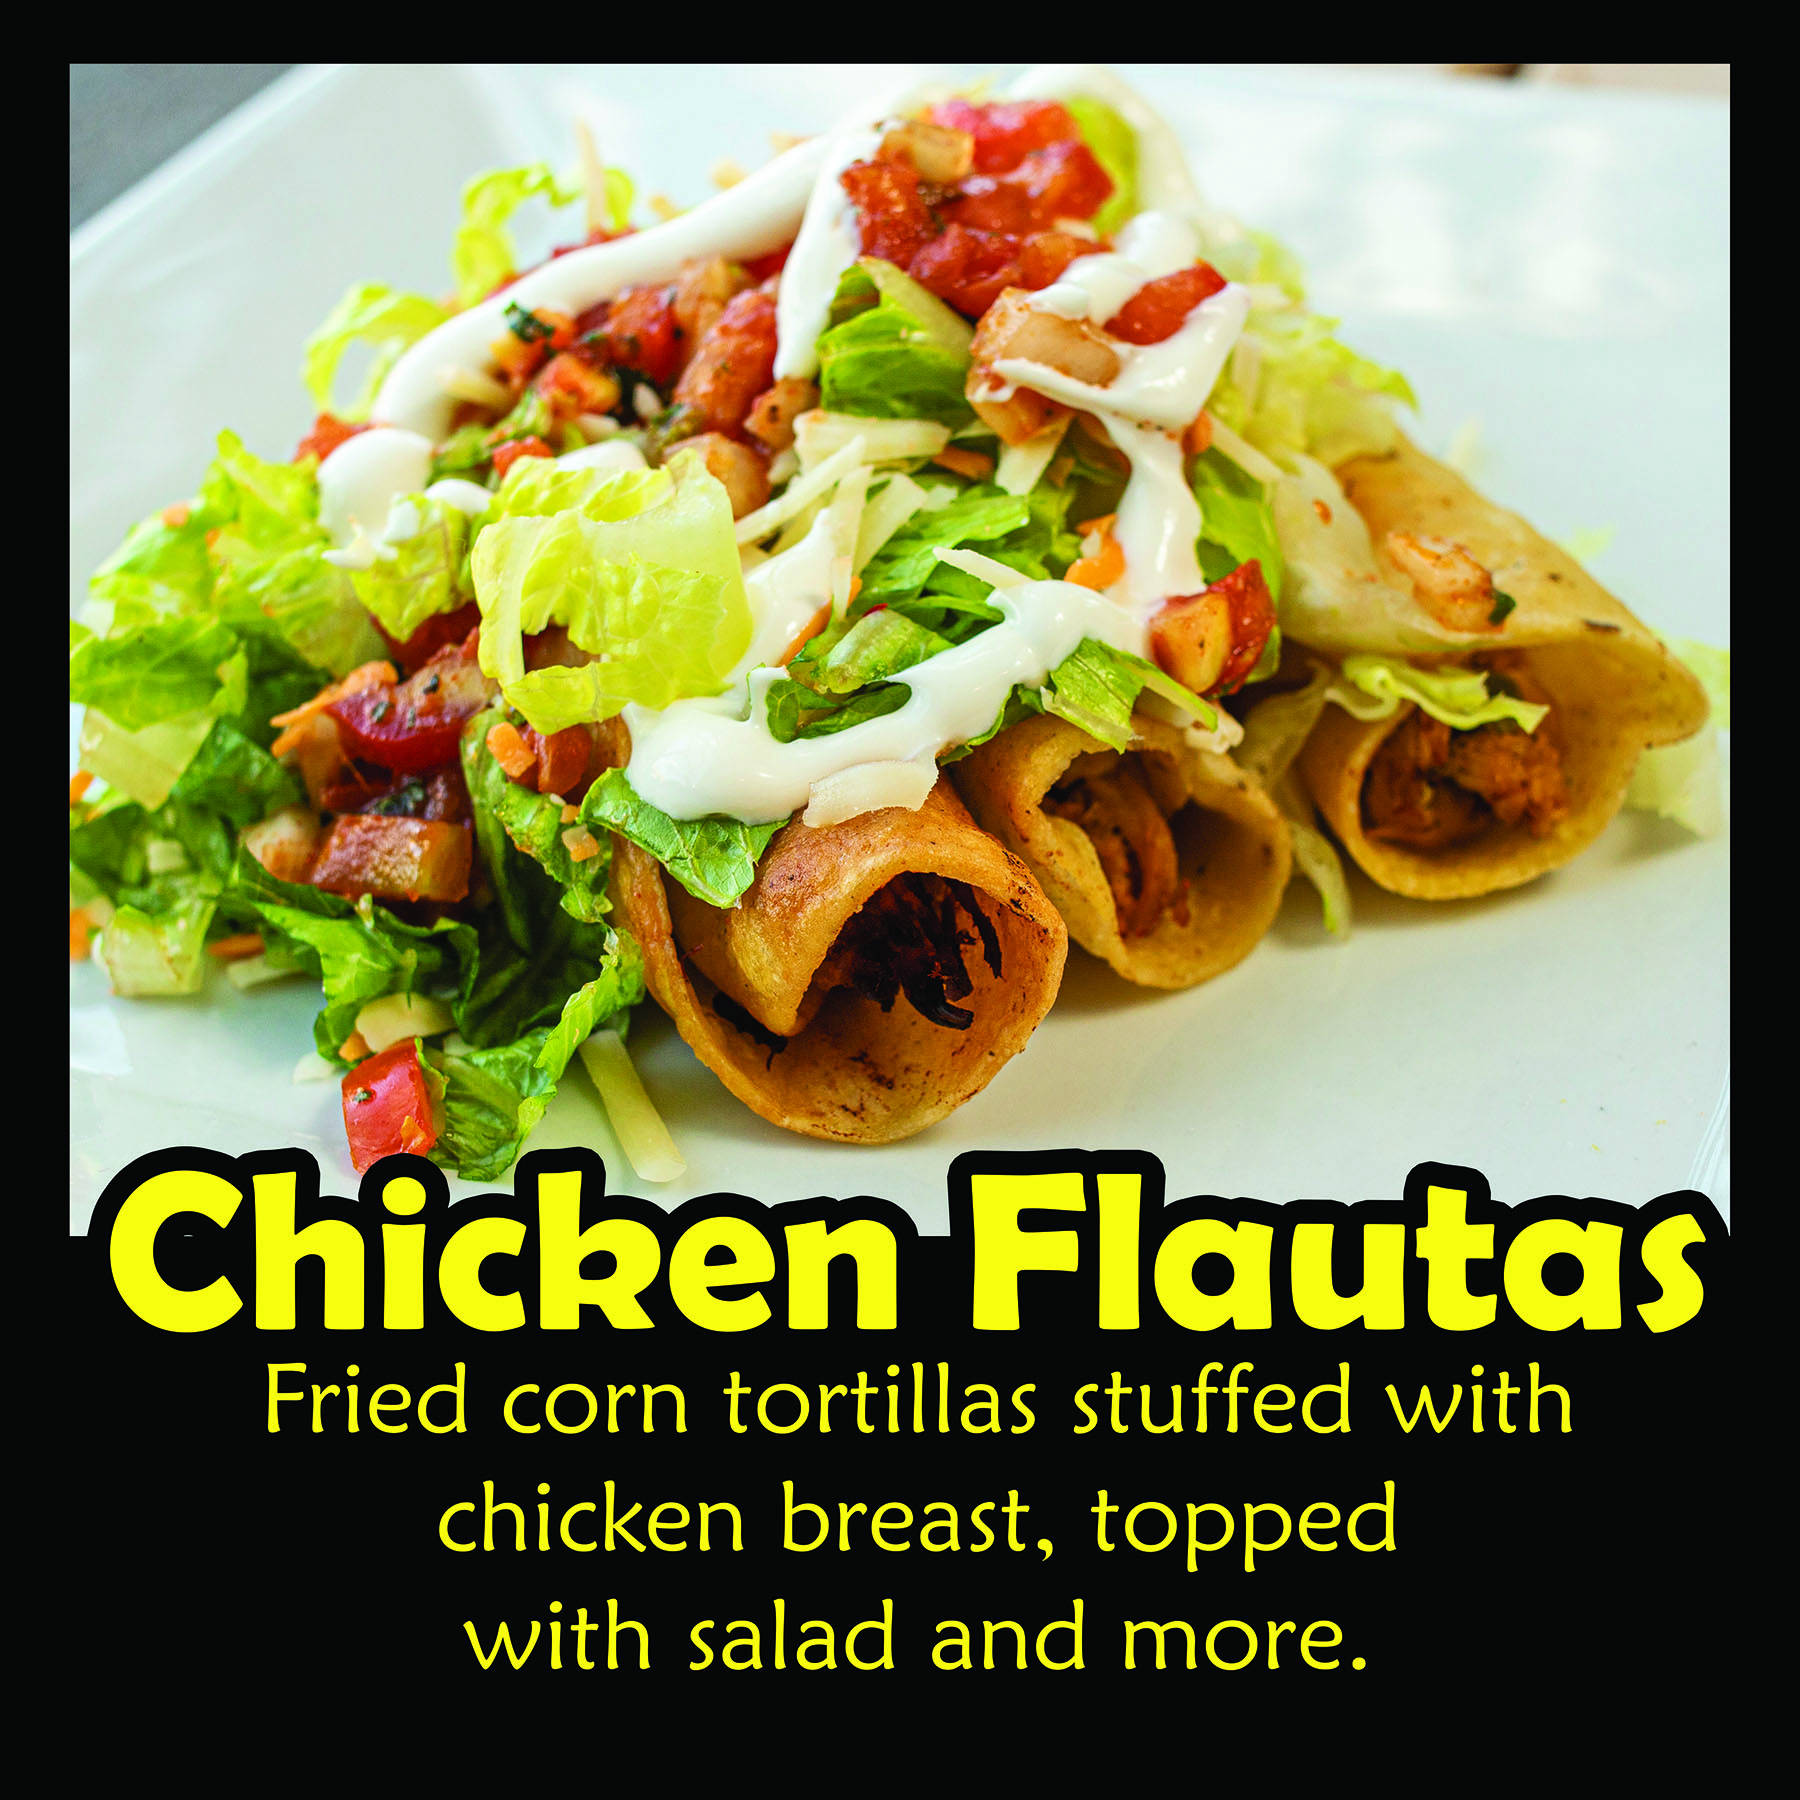 Chicken Flautas: Fried corn tortillas stuffed with chicken breast, topped with salad and more.